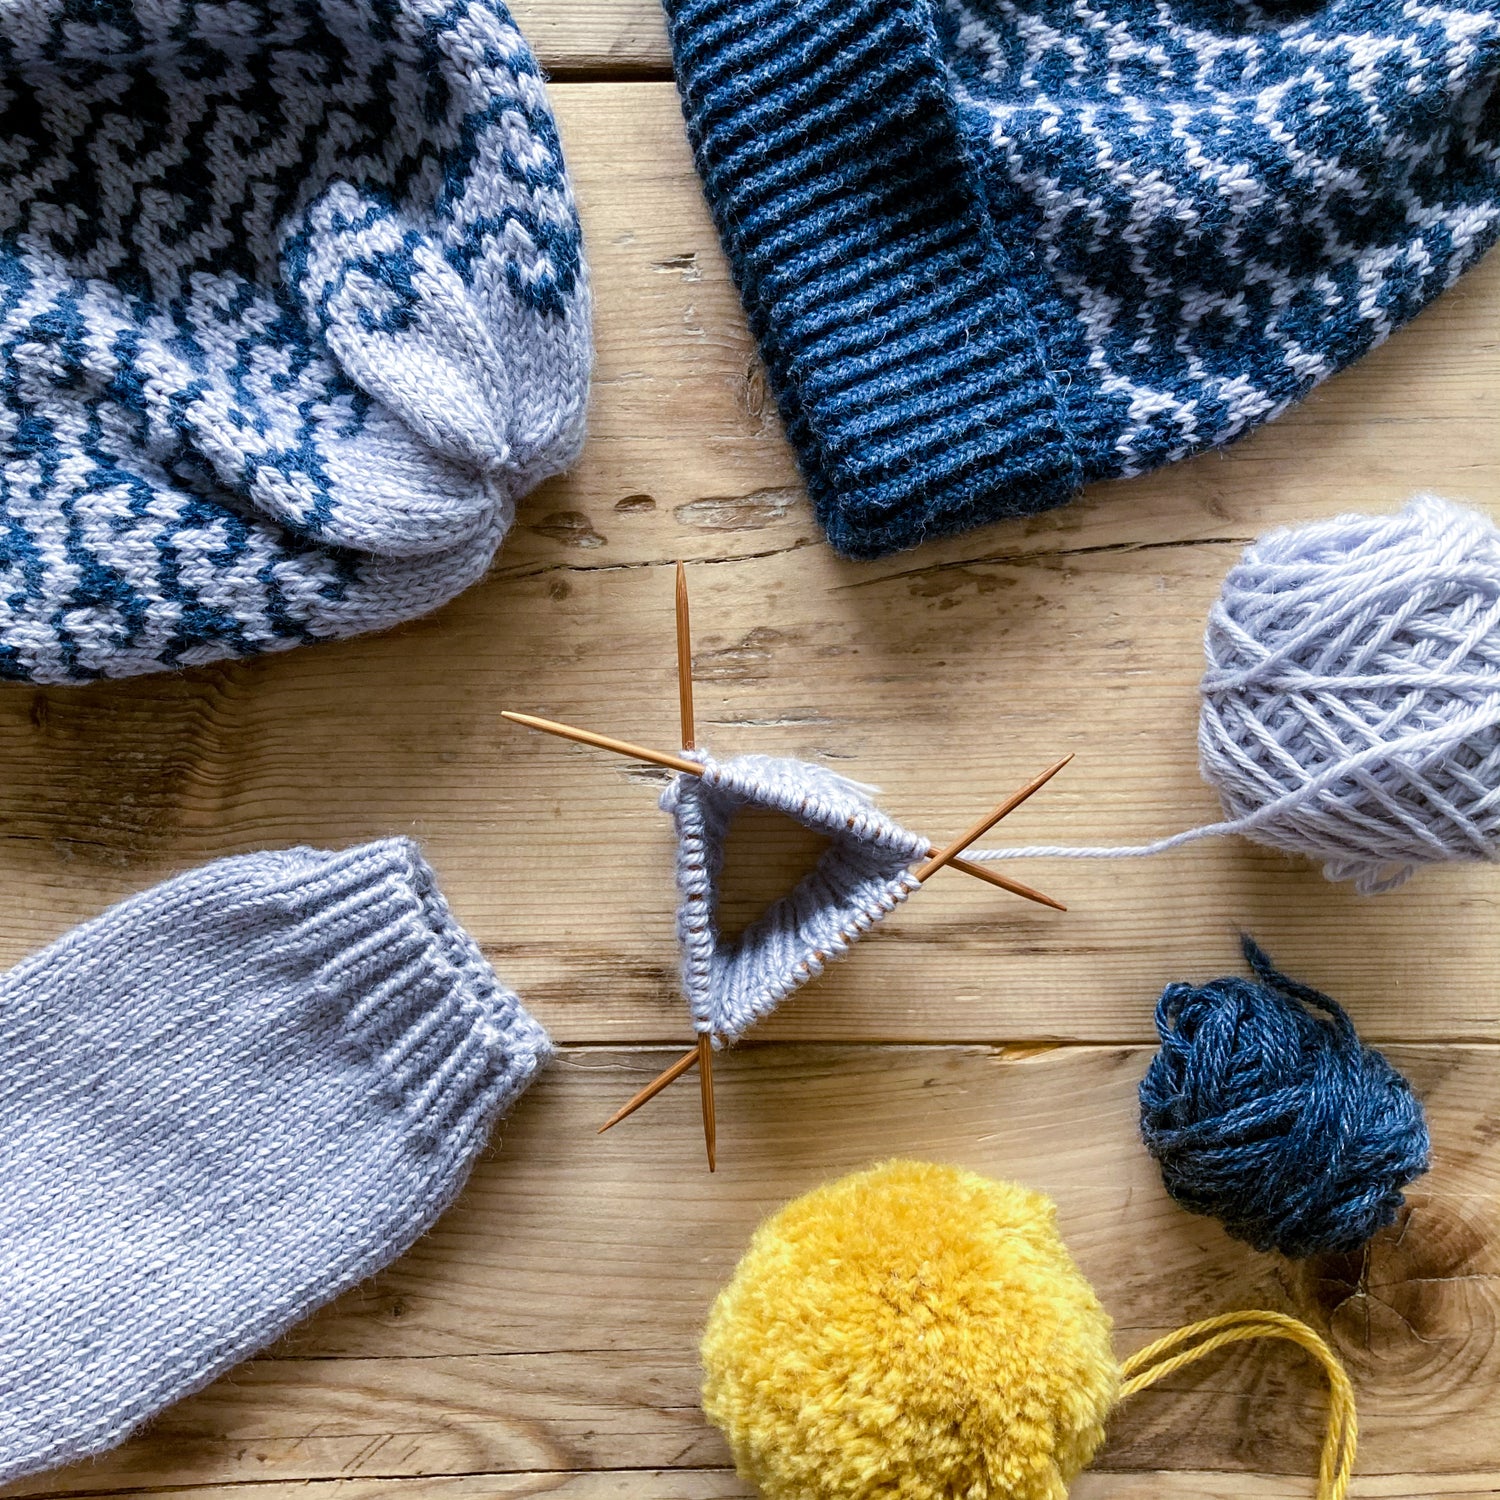 A rustic wooden table top with various knitted works in progress, including hats, pom poms and grey yarn on double pointed needles in the centre of the image.